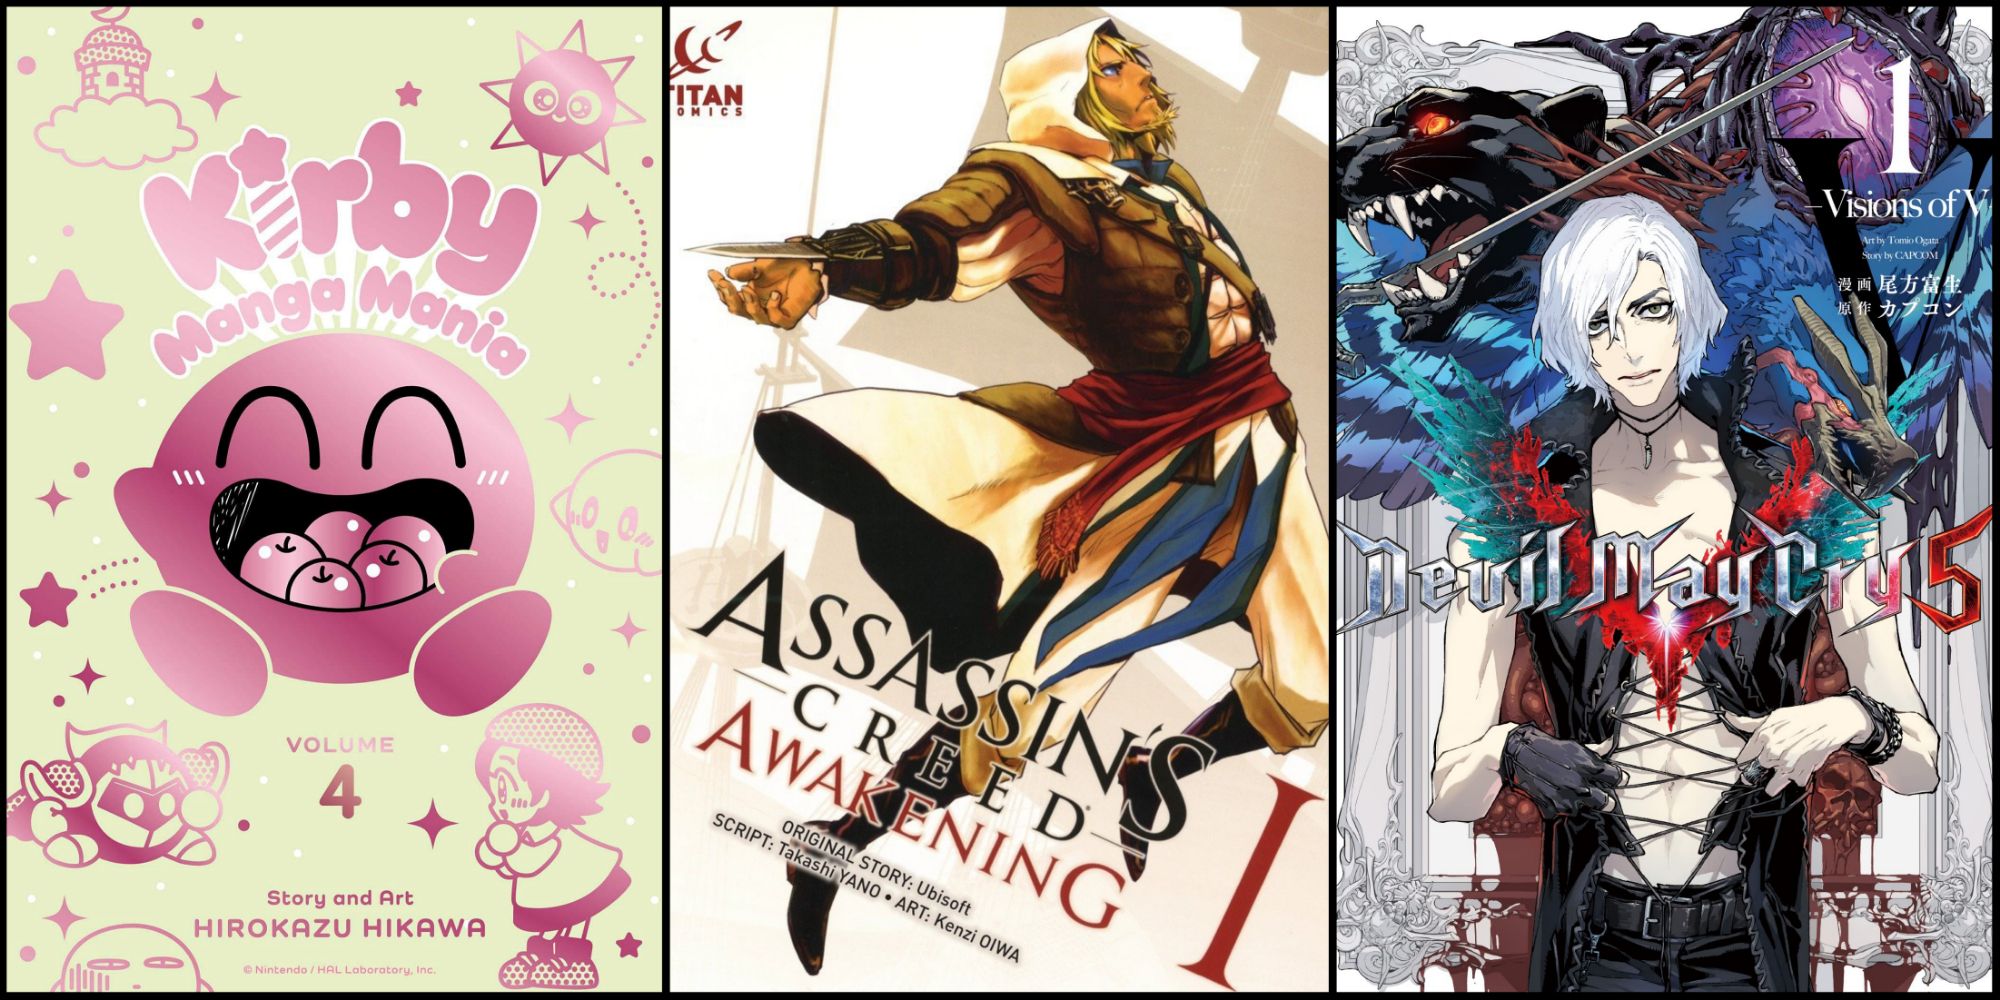 Banner of Manga for the Kirby, Assassins Creed, and Devil May Cry video games..